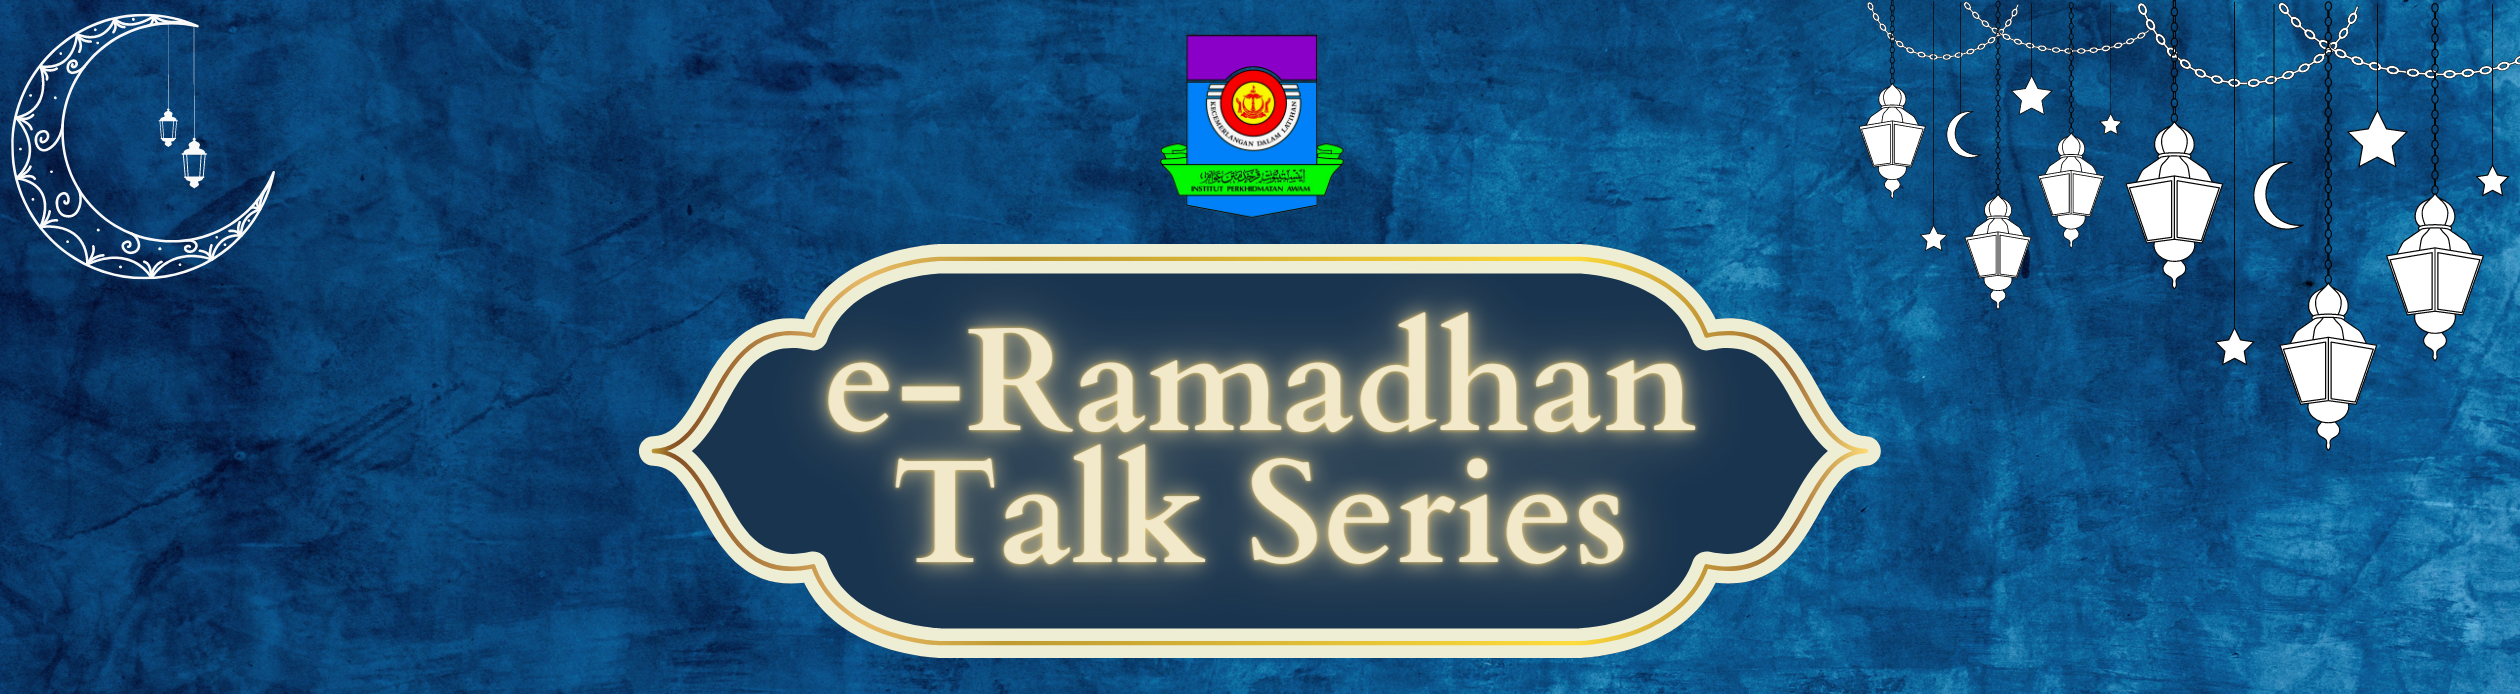 e-Ramadhan Talk Series Banner-Front.png